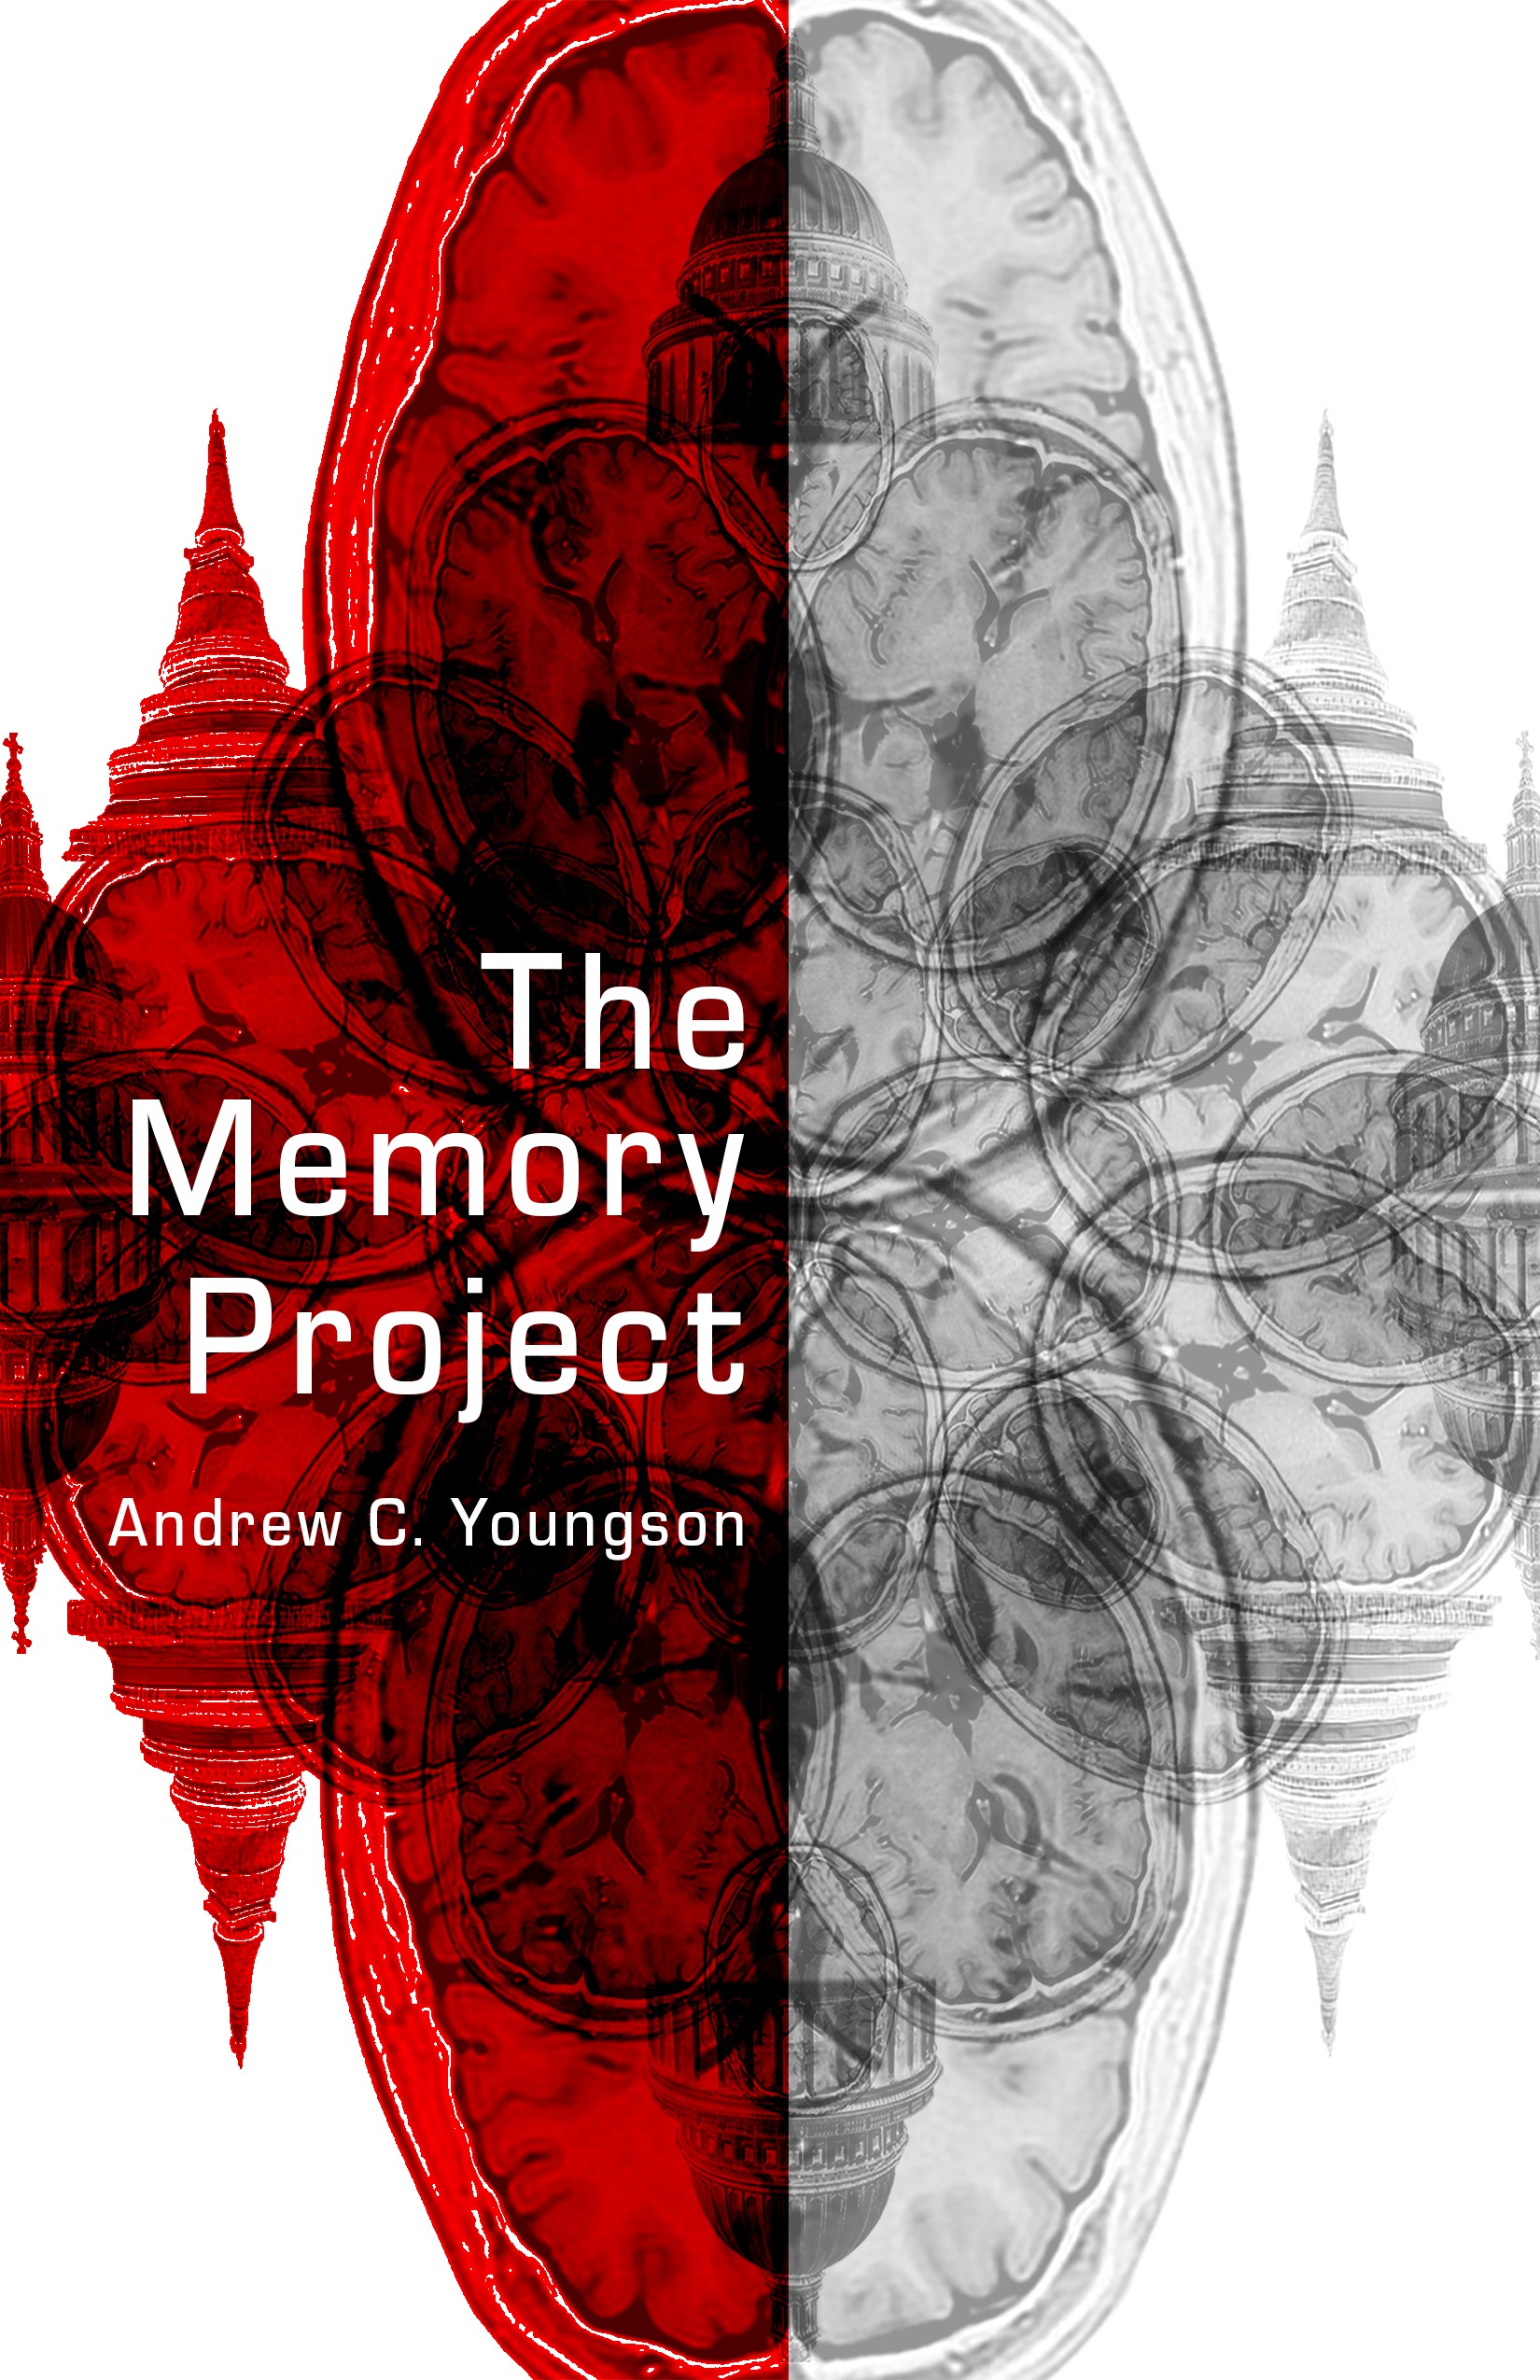 FREE: The Memory Project by Andrew C. Youngson